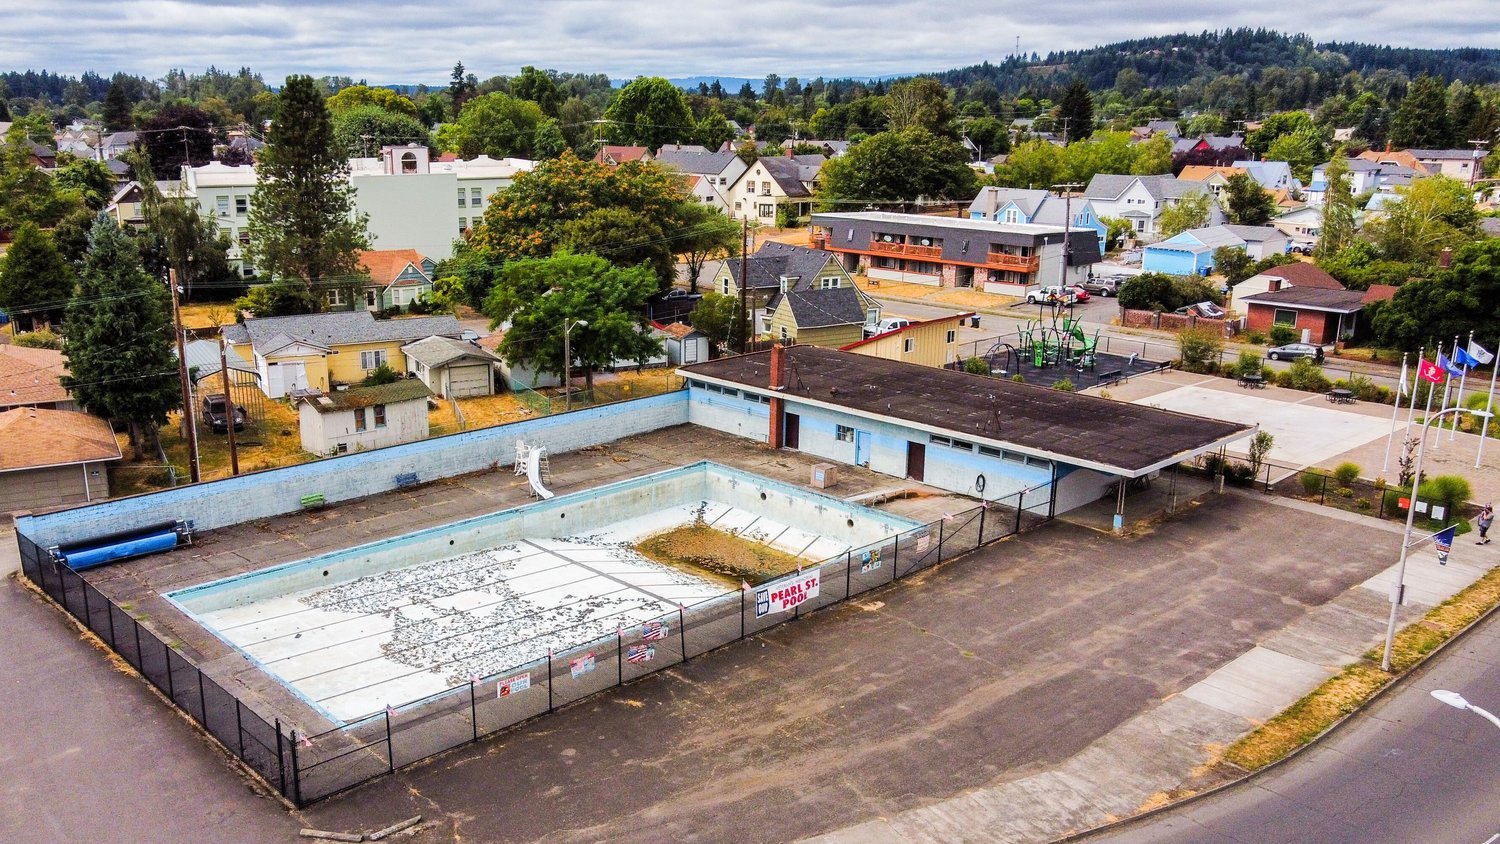 The Pearl Street Pool is pictured from above in this photograph captured last August in Centralia.